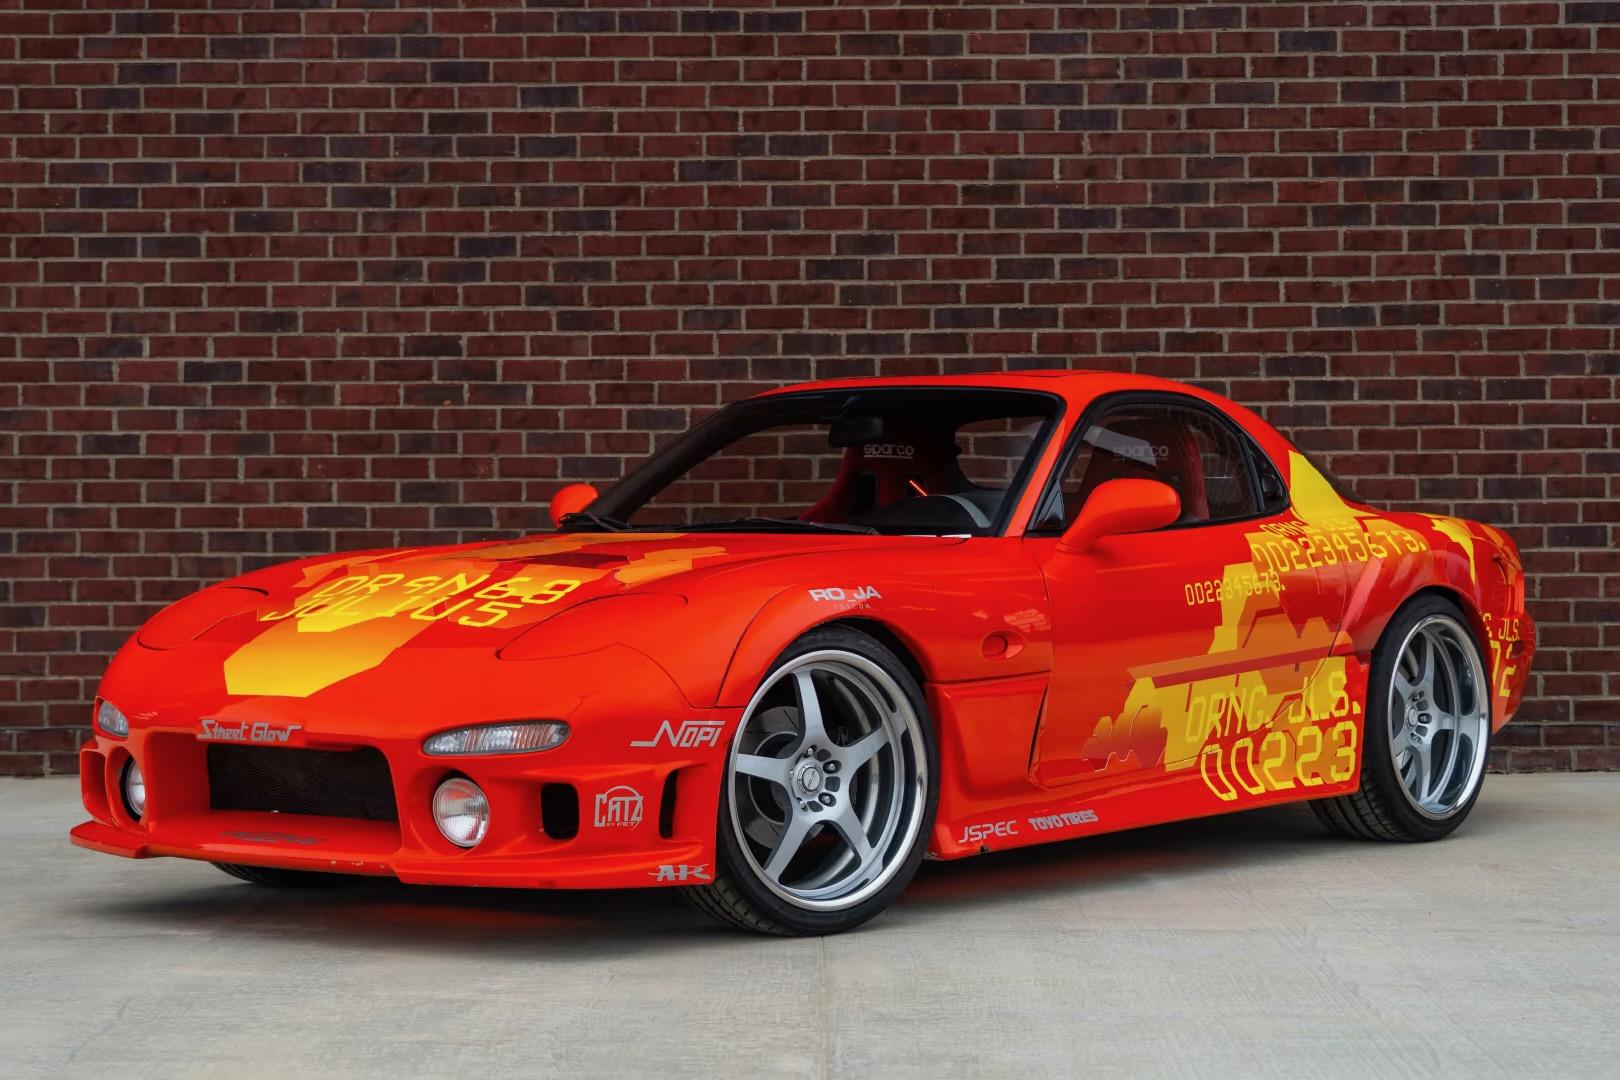 The original 1993 Mazda RX-7 from Fast and Furious is up for